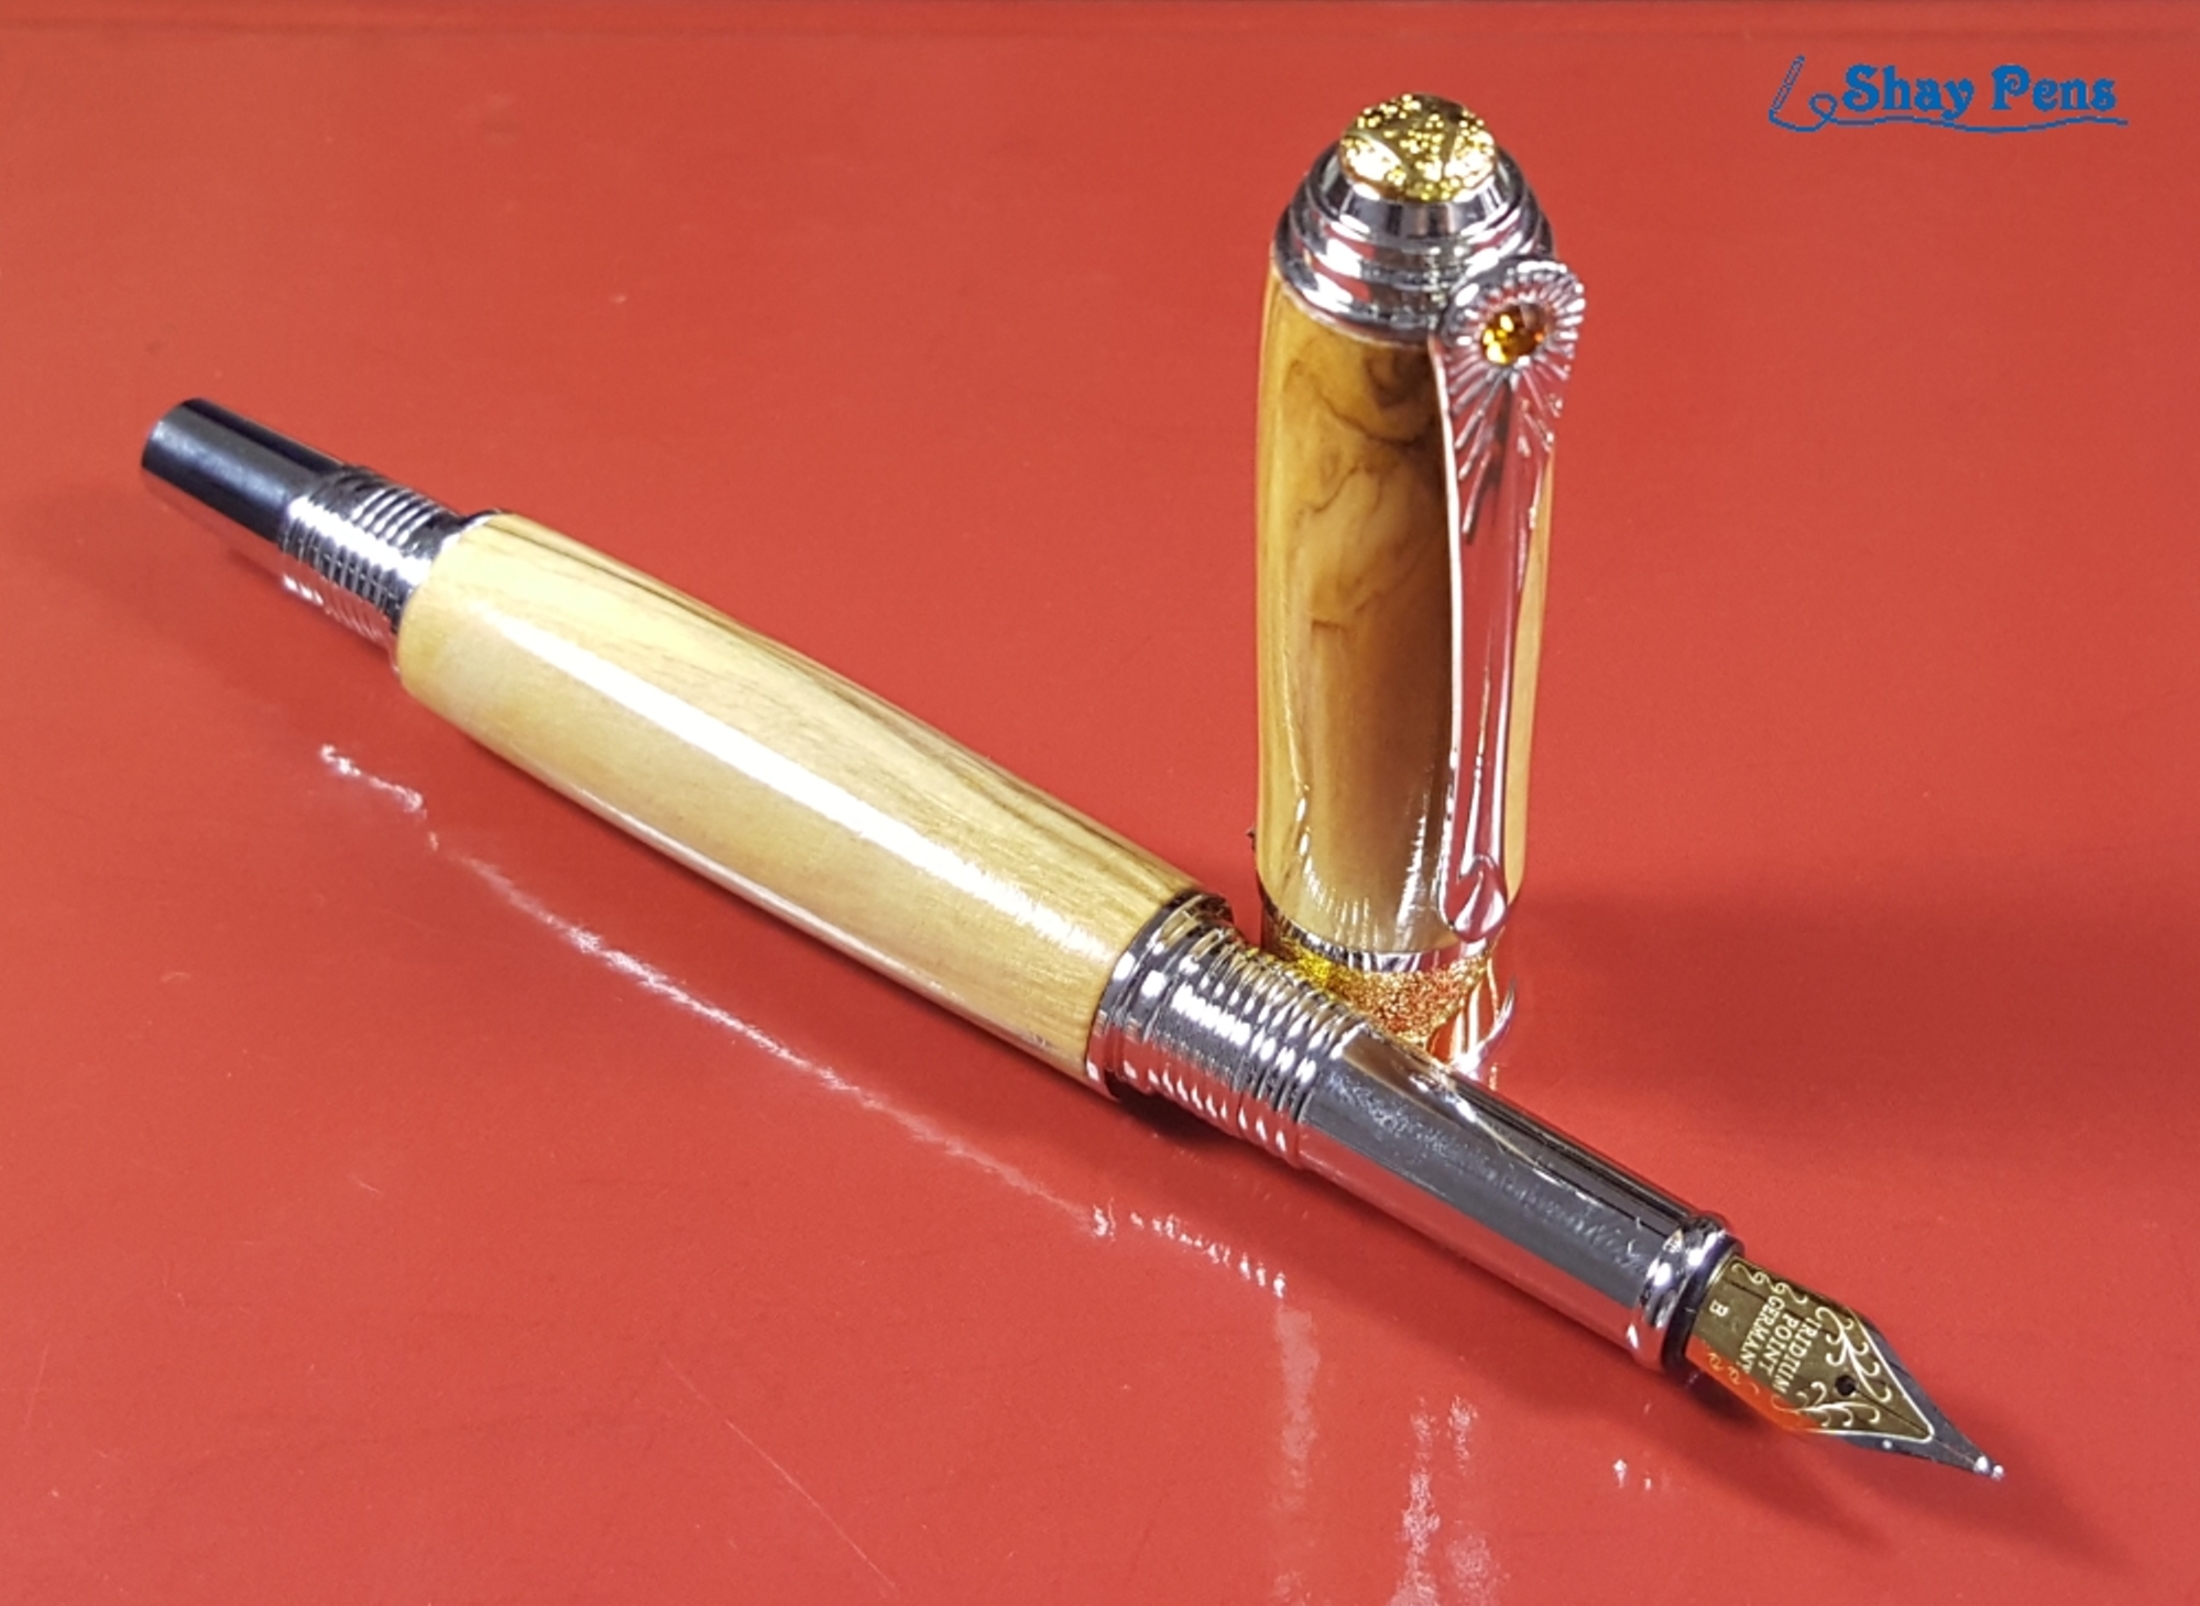 Handcrafted Art Deco Fountain Pen with Olivewood body